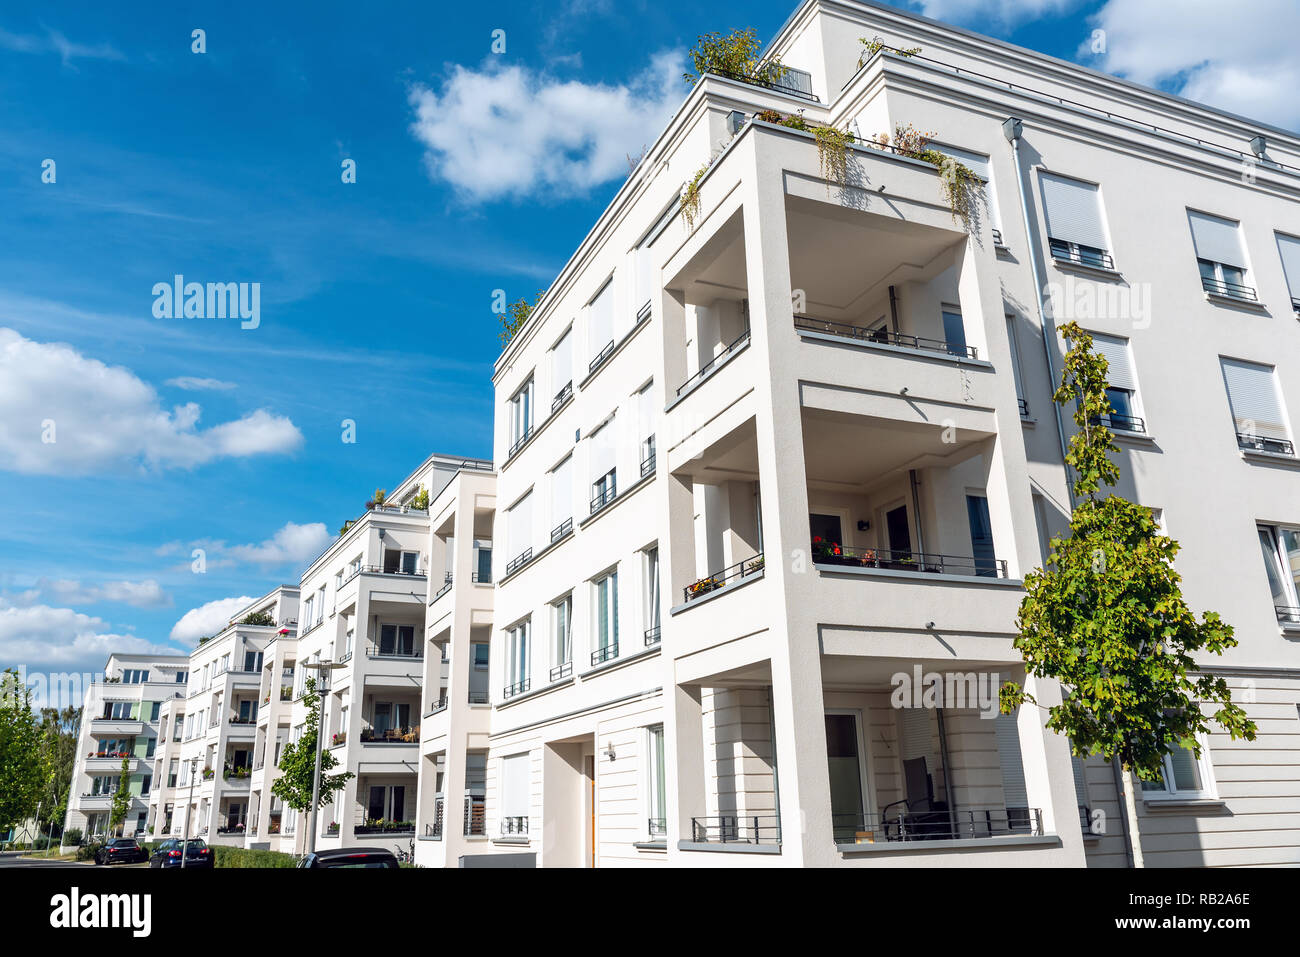 Newly built white apartment buildings seen in Berlin, Germany Stock Photo